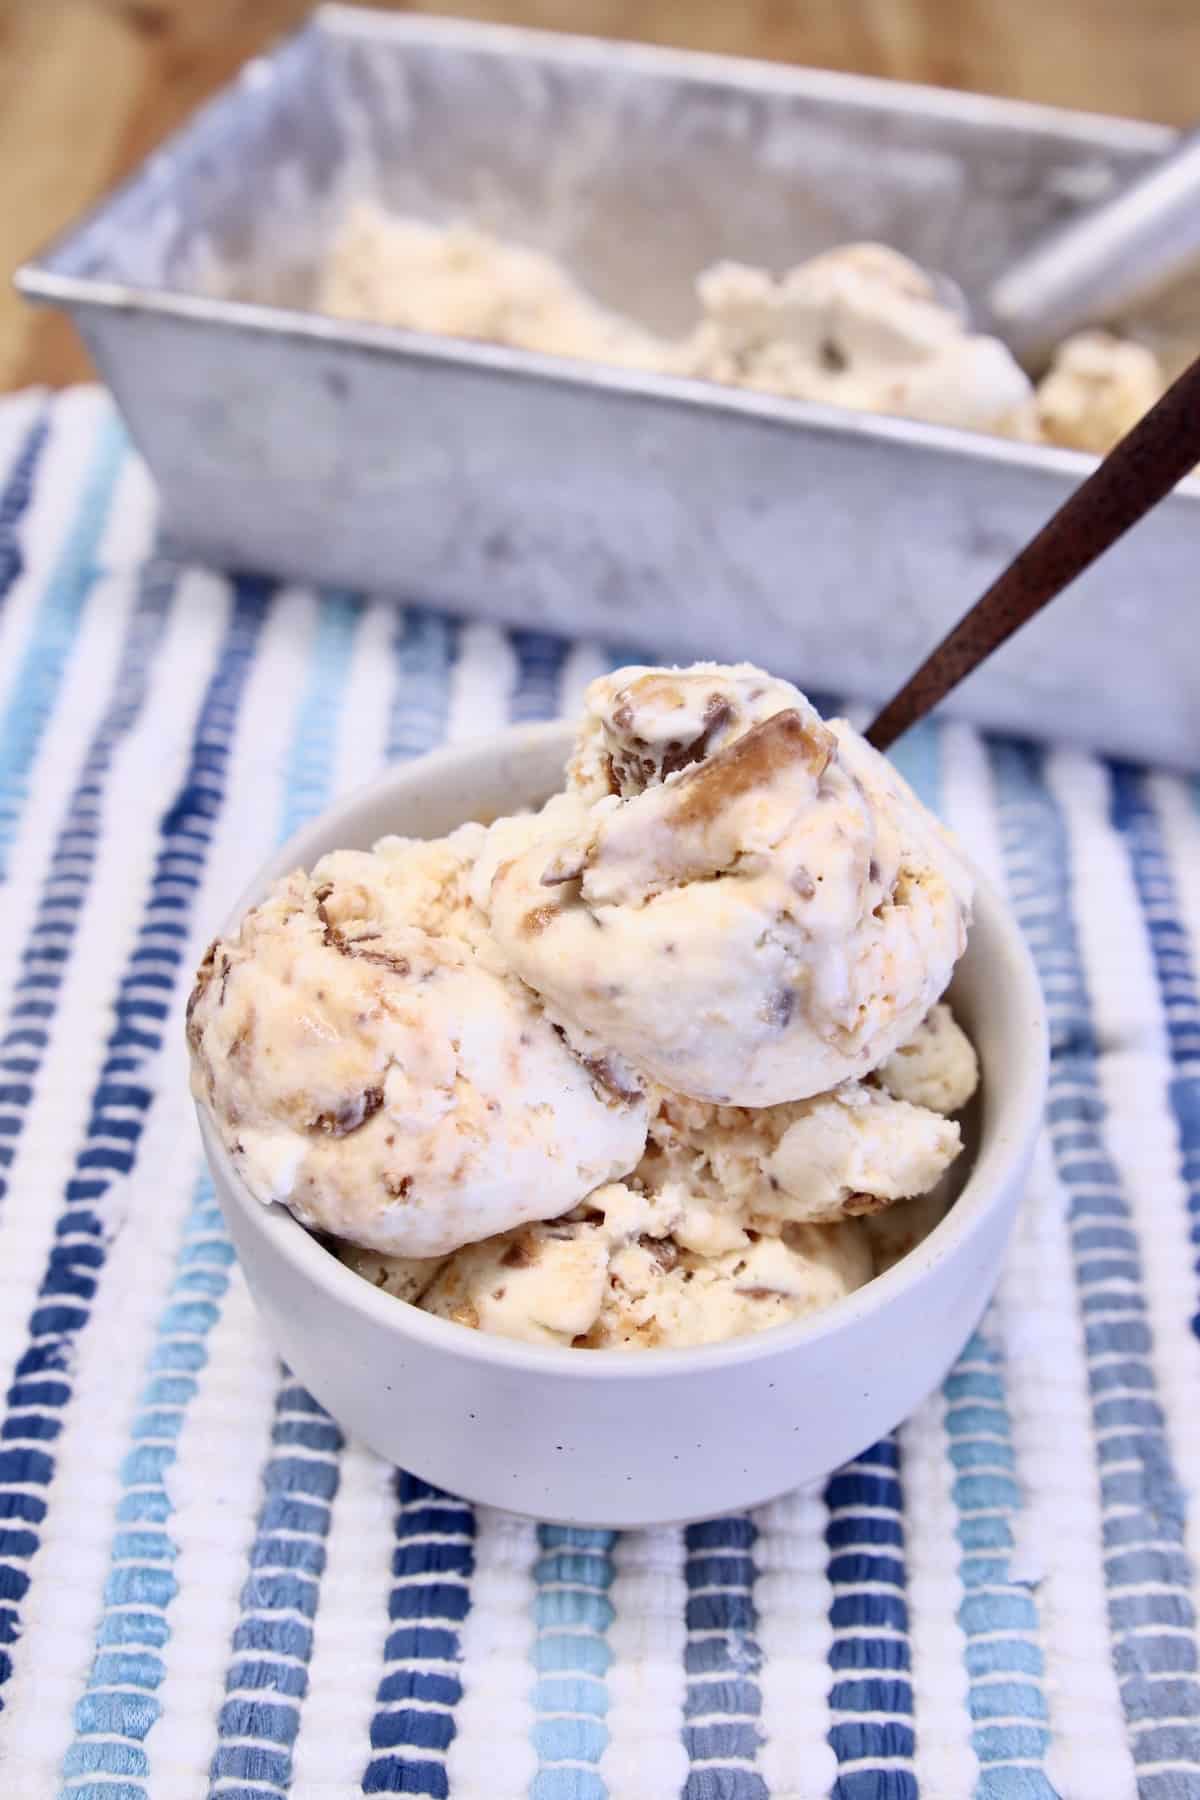 Butterfinger Ice Cream in a bowl.